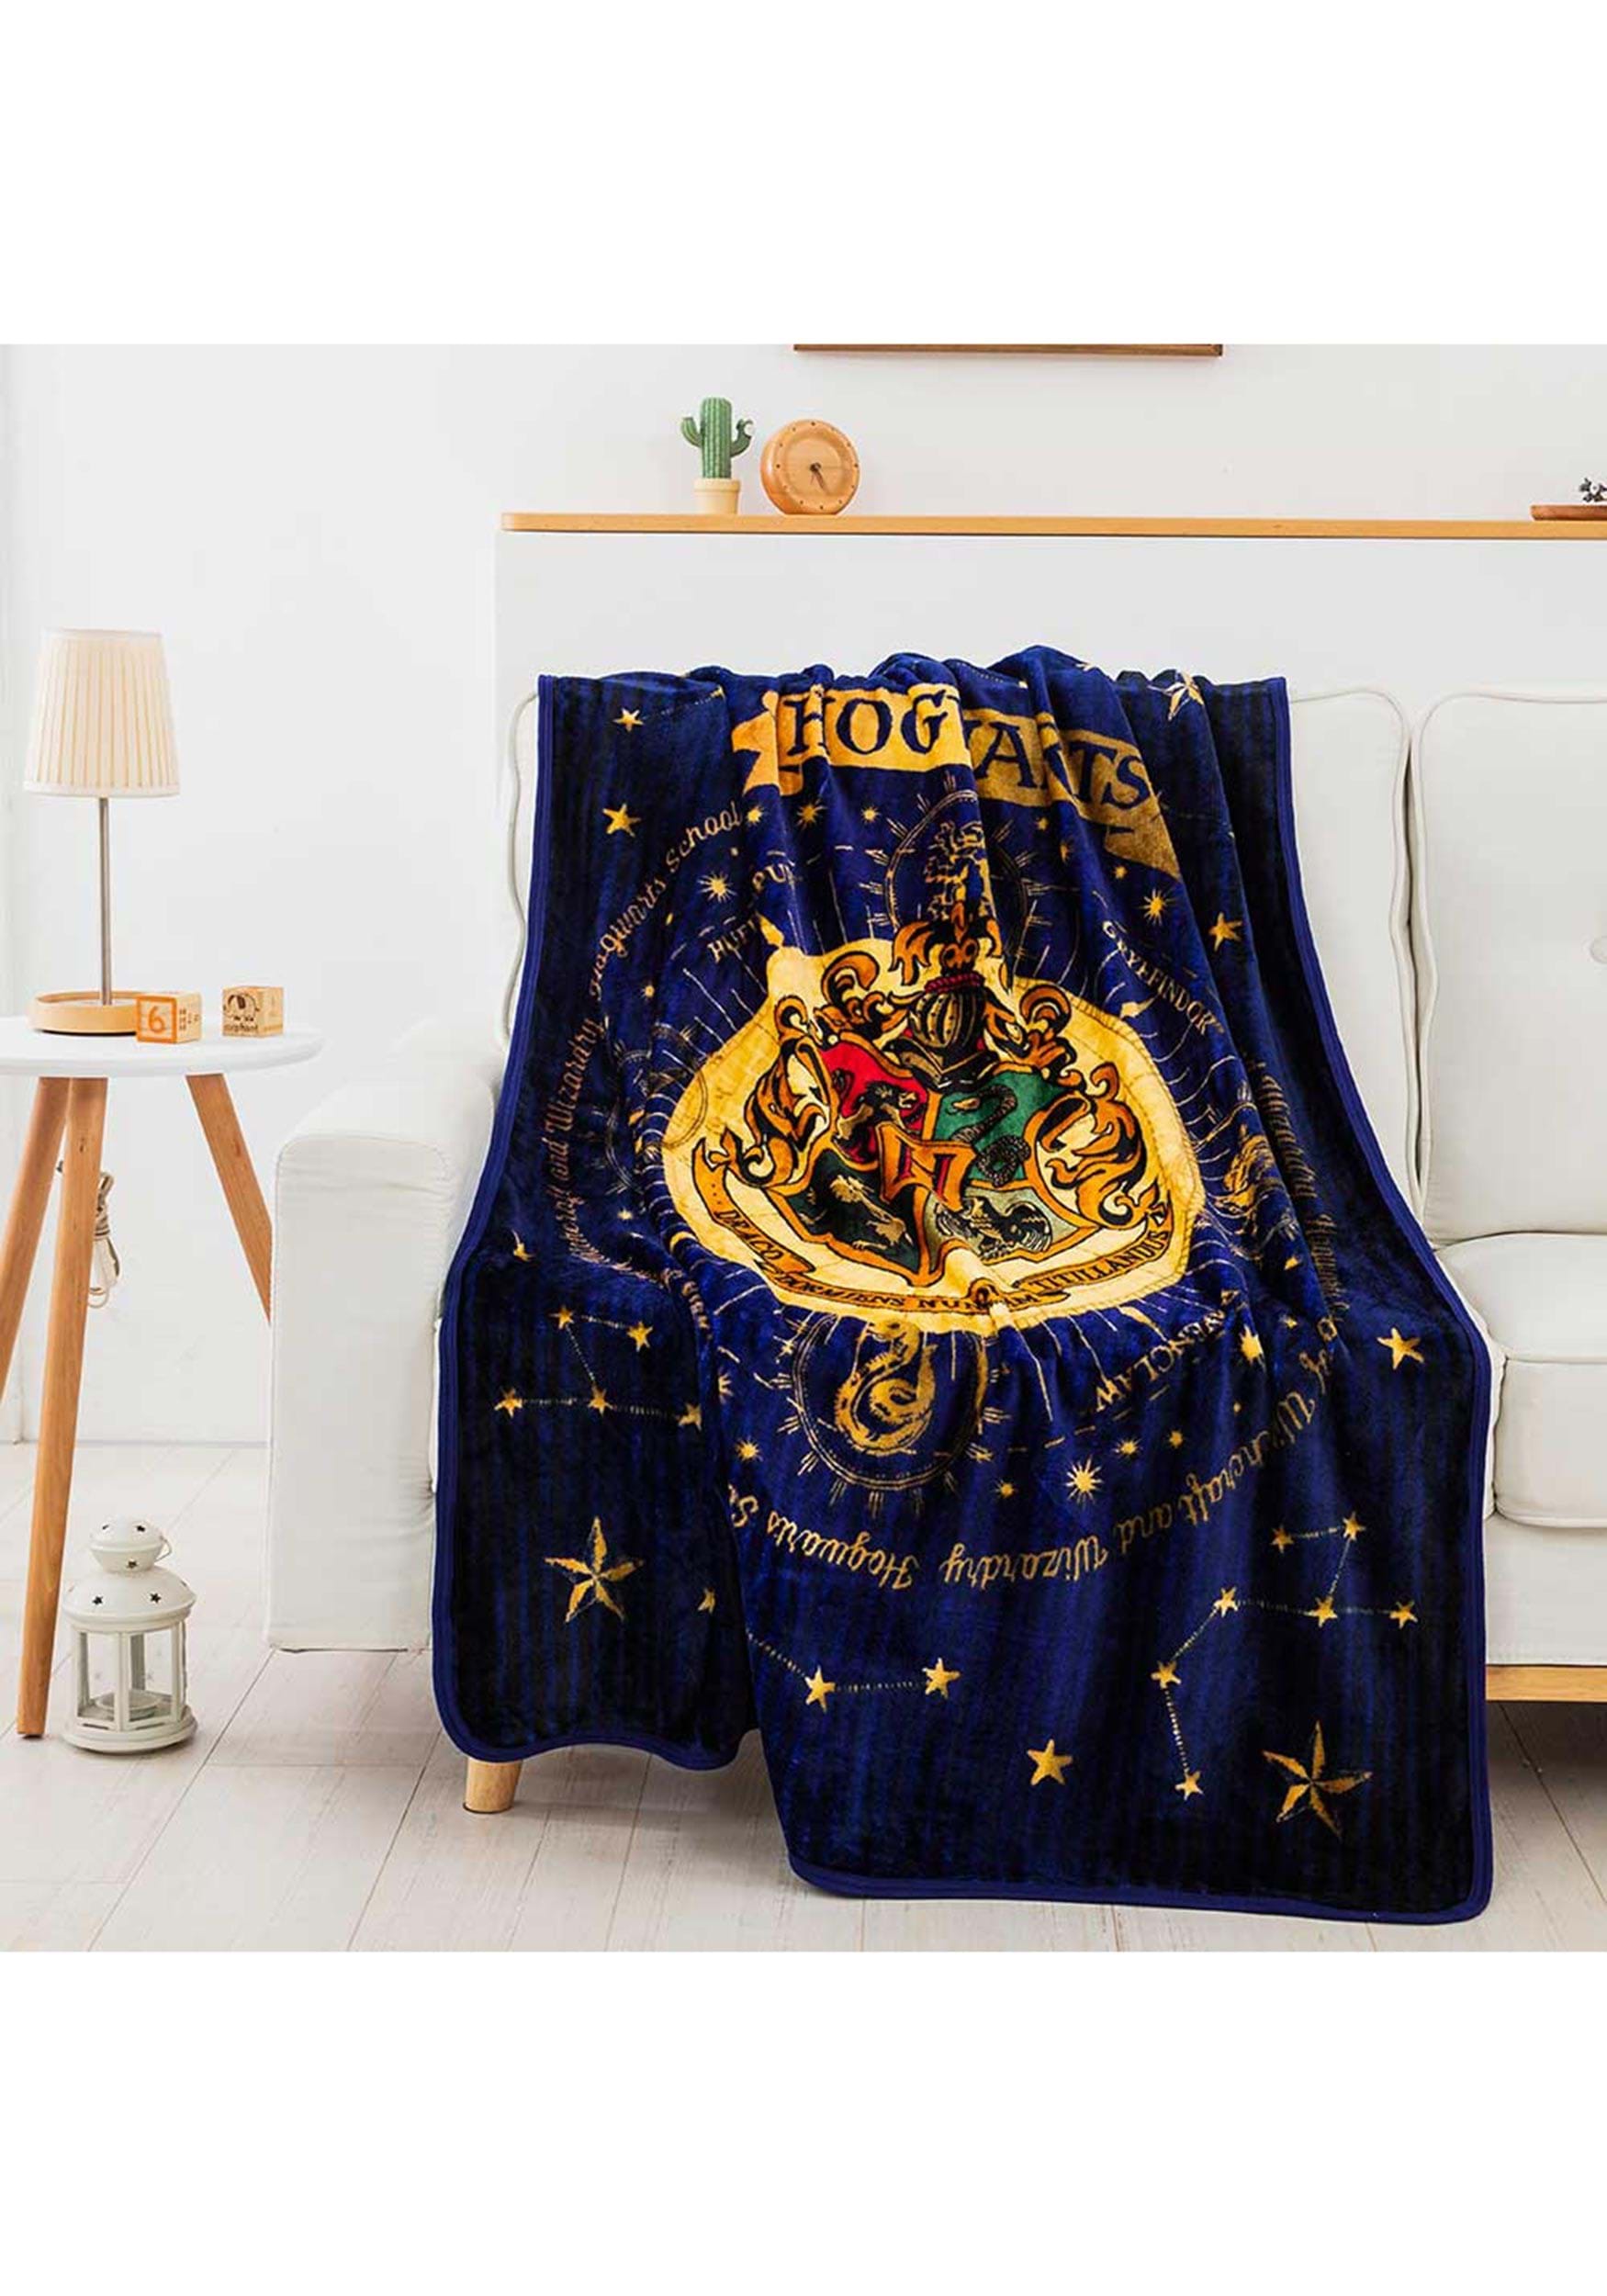 Harry Potter Ravenclaw House Crest Silk Touch Throw 50 x 60- Ravenclaw 